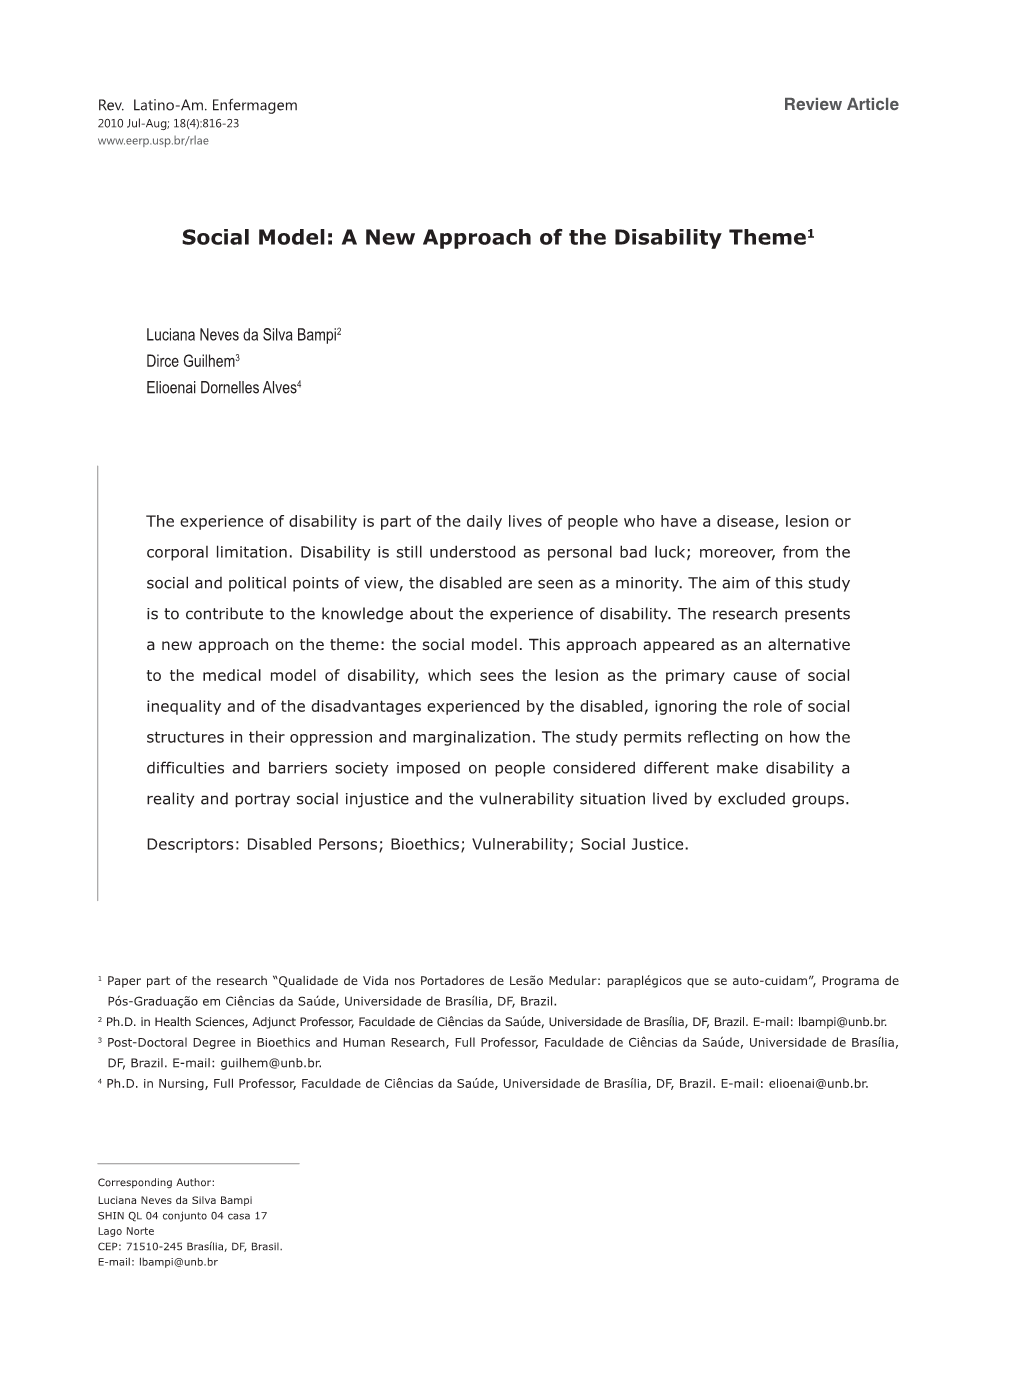 Social Model: a New Approach of the Disability Theme1